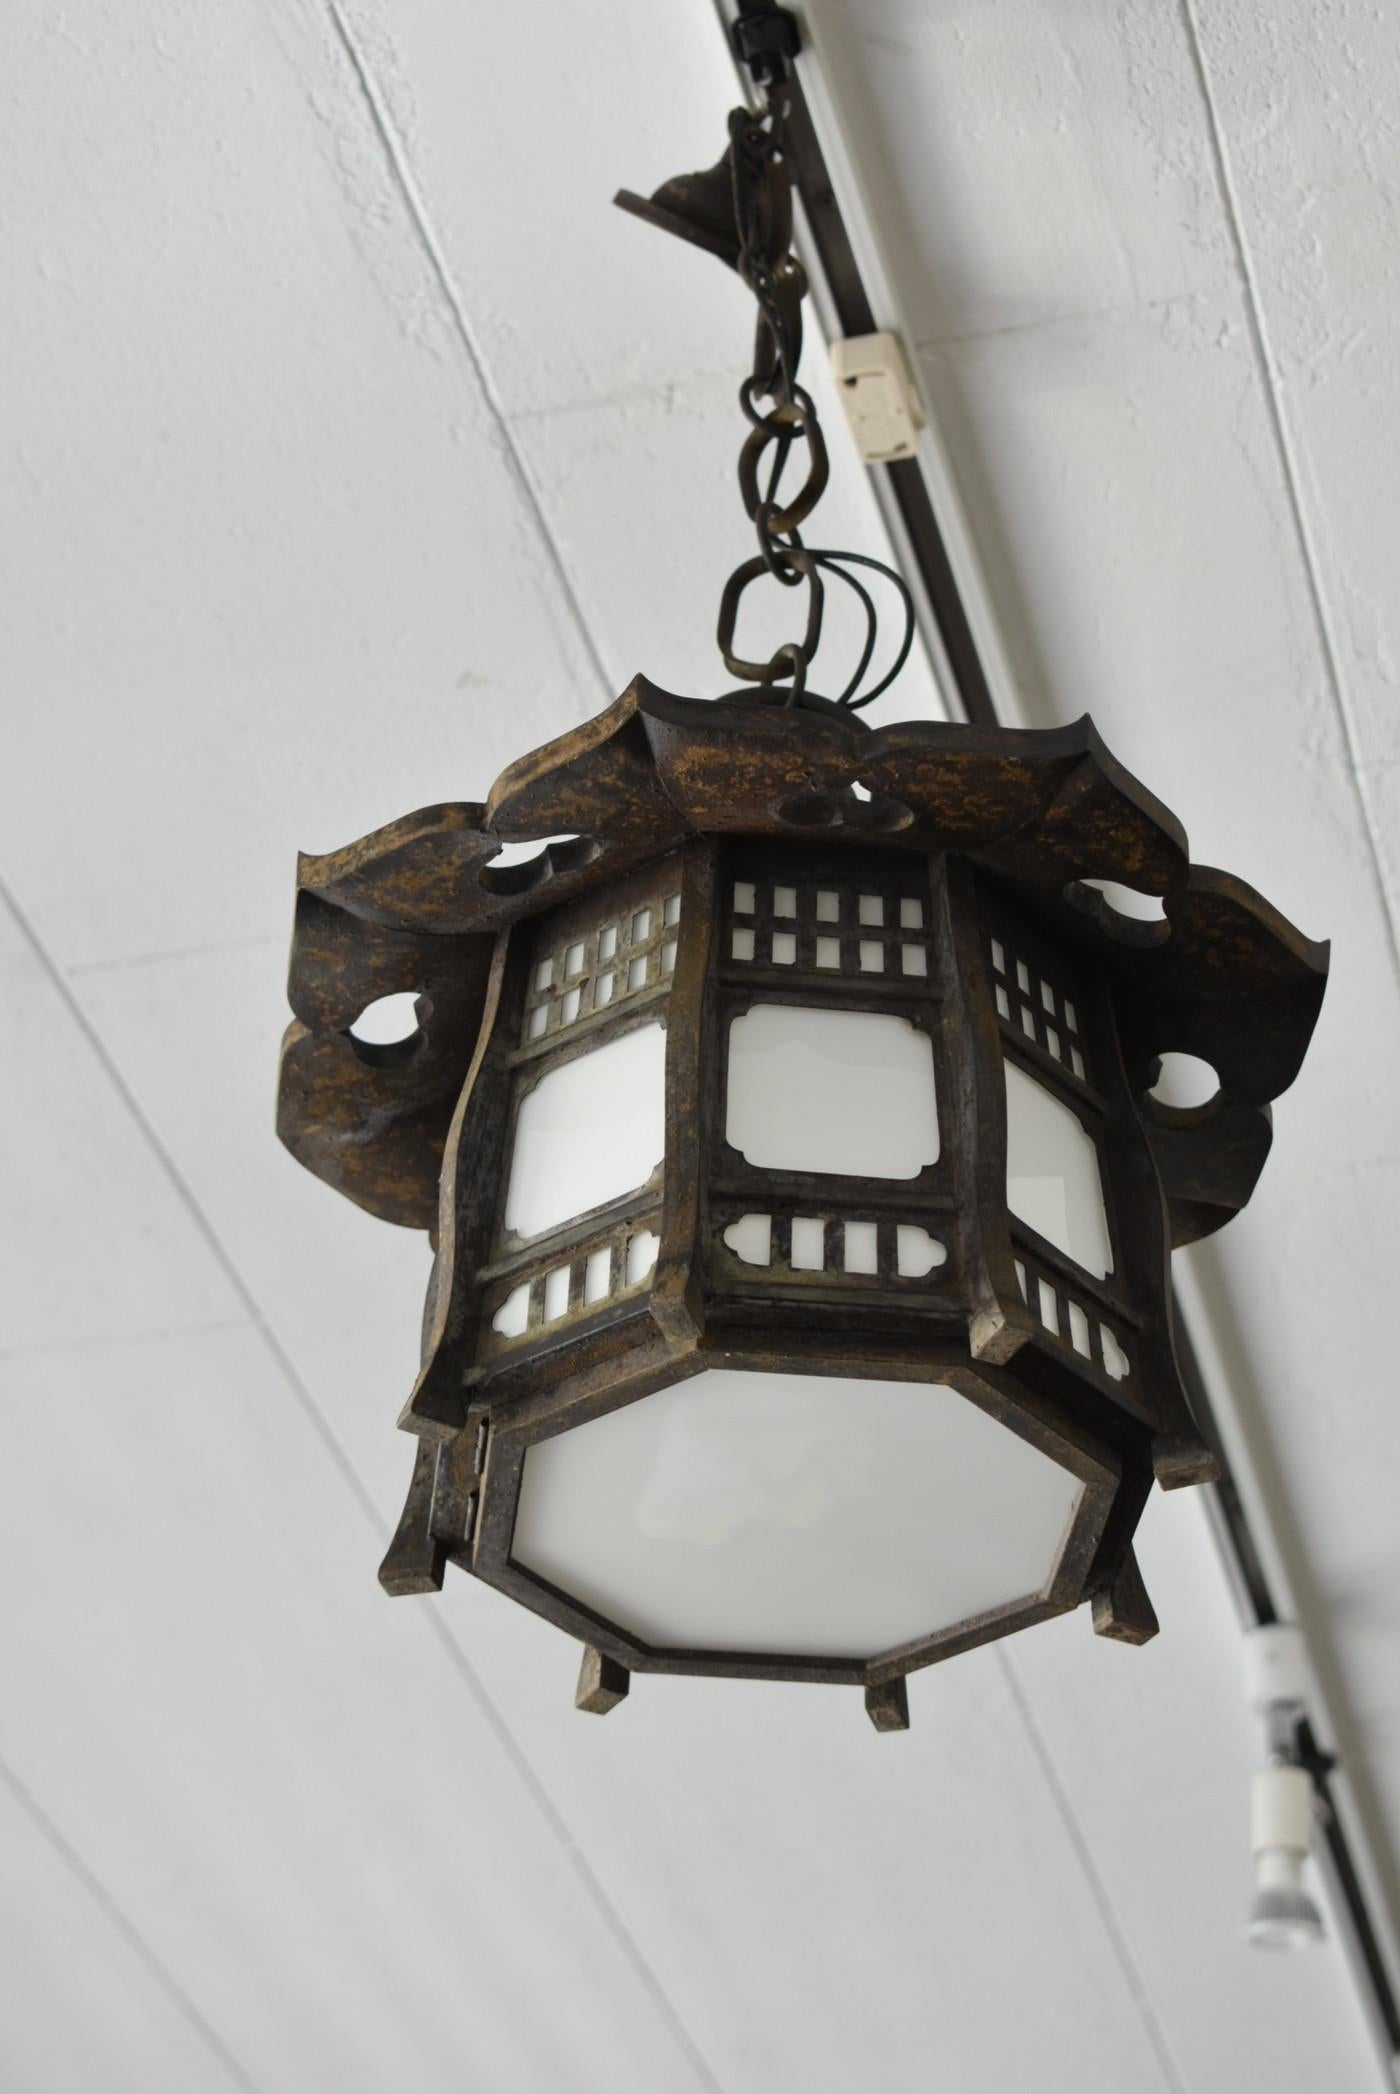 Taisho Japanese Copper Antique Hanging Lantern/Pendant Light with Ceiling, 1900-1920